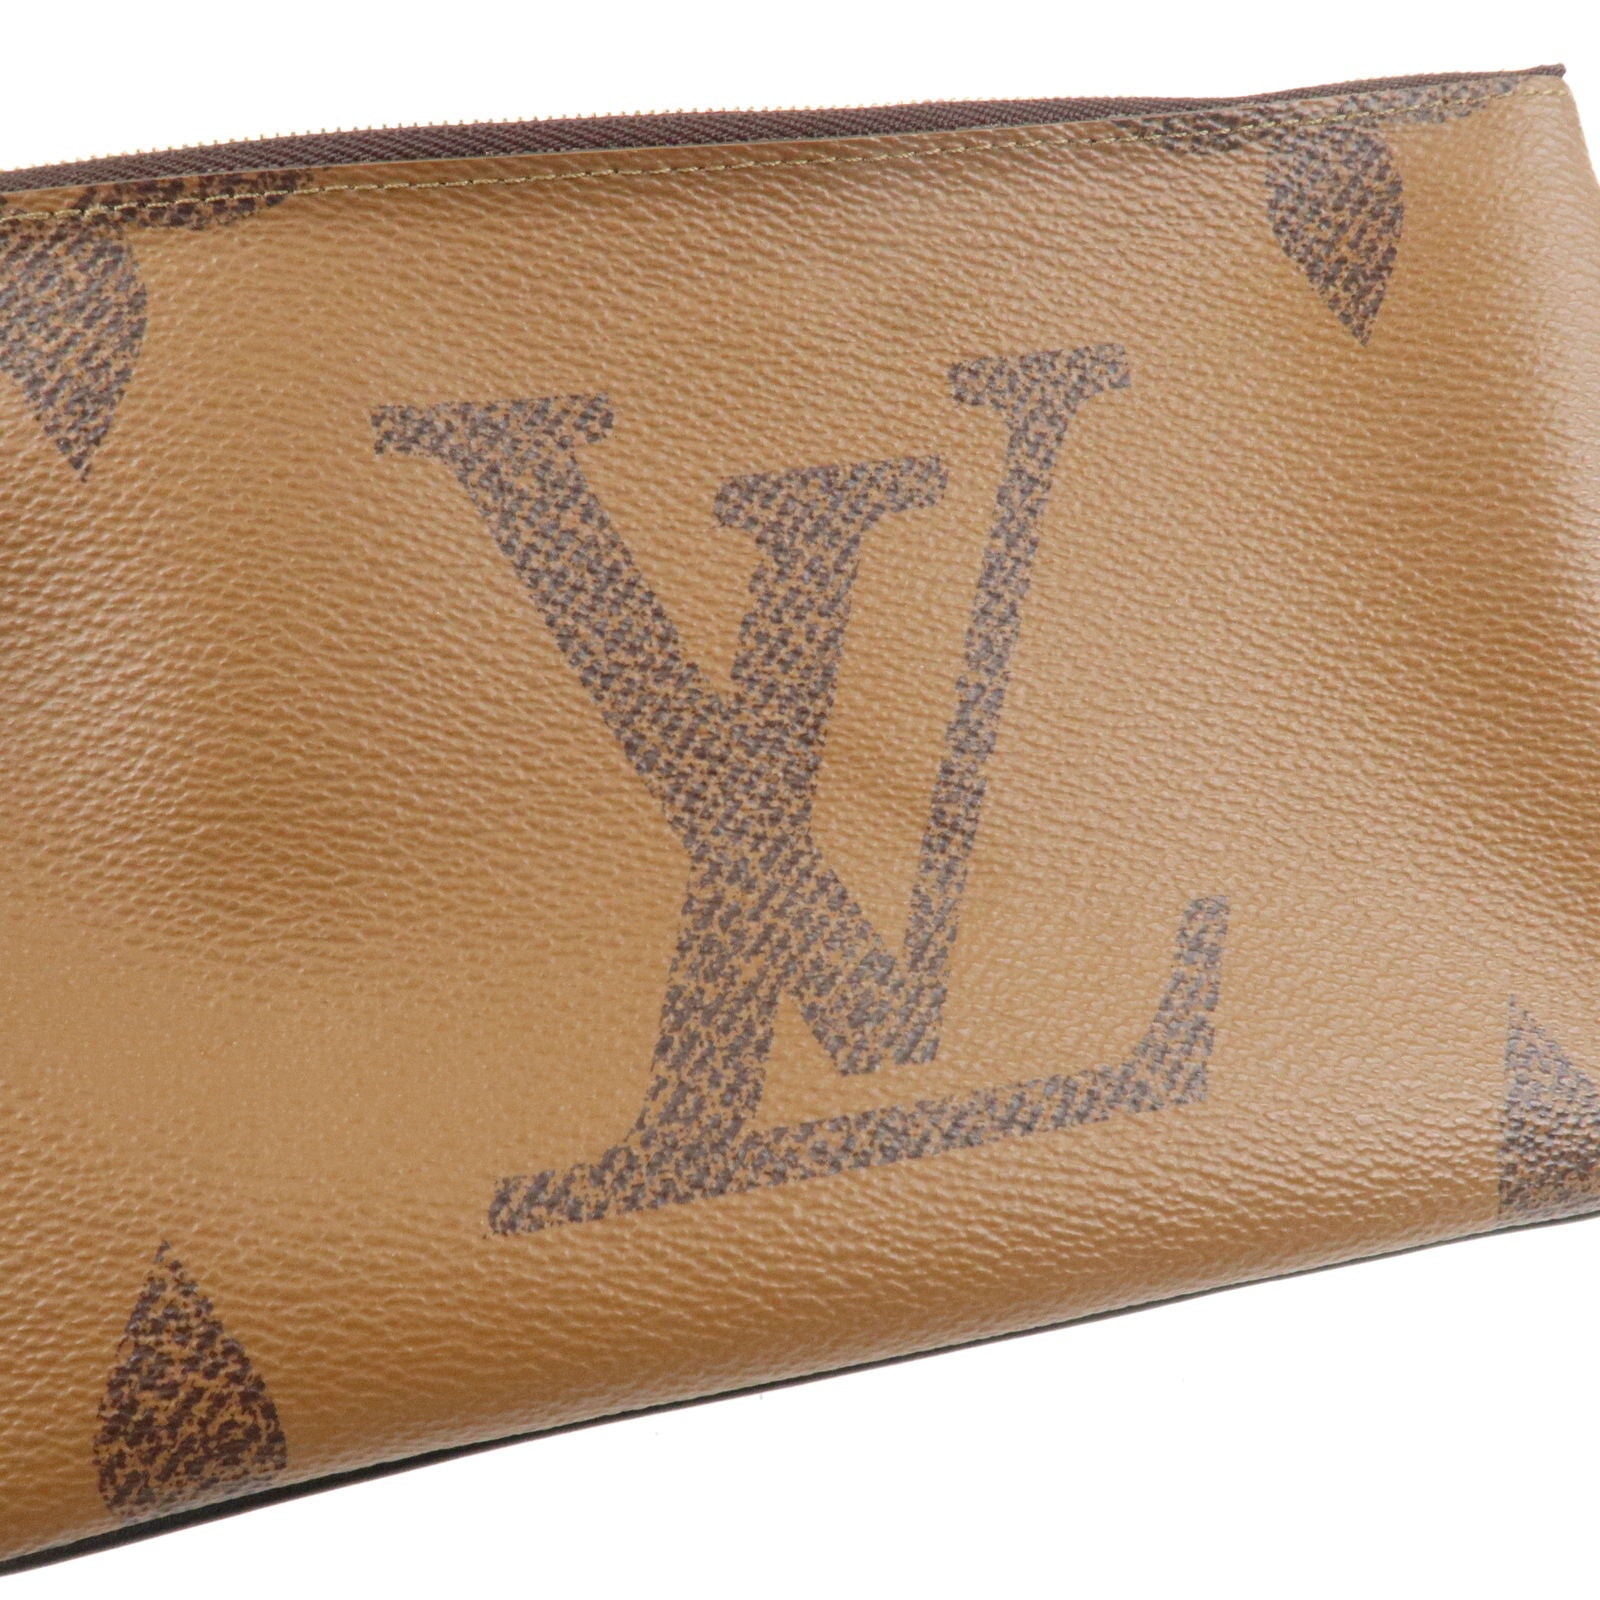 Double Zip Pochette Other Monogram Canvas - Wallets and Small Leather Goods  M69203